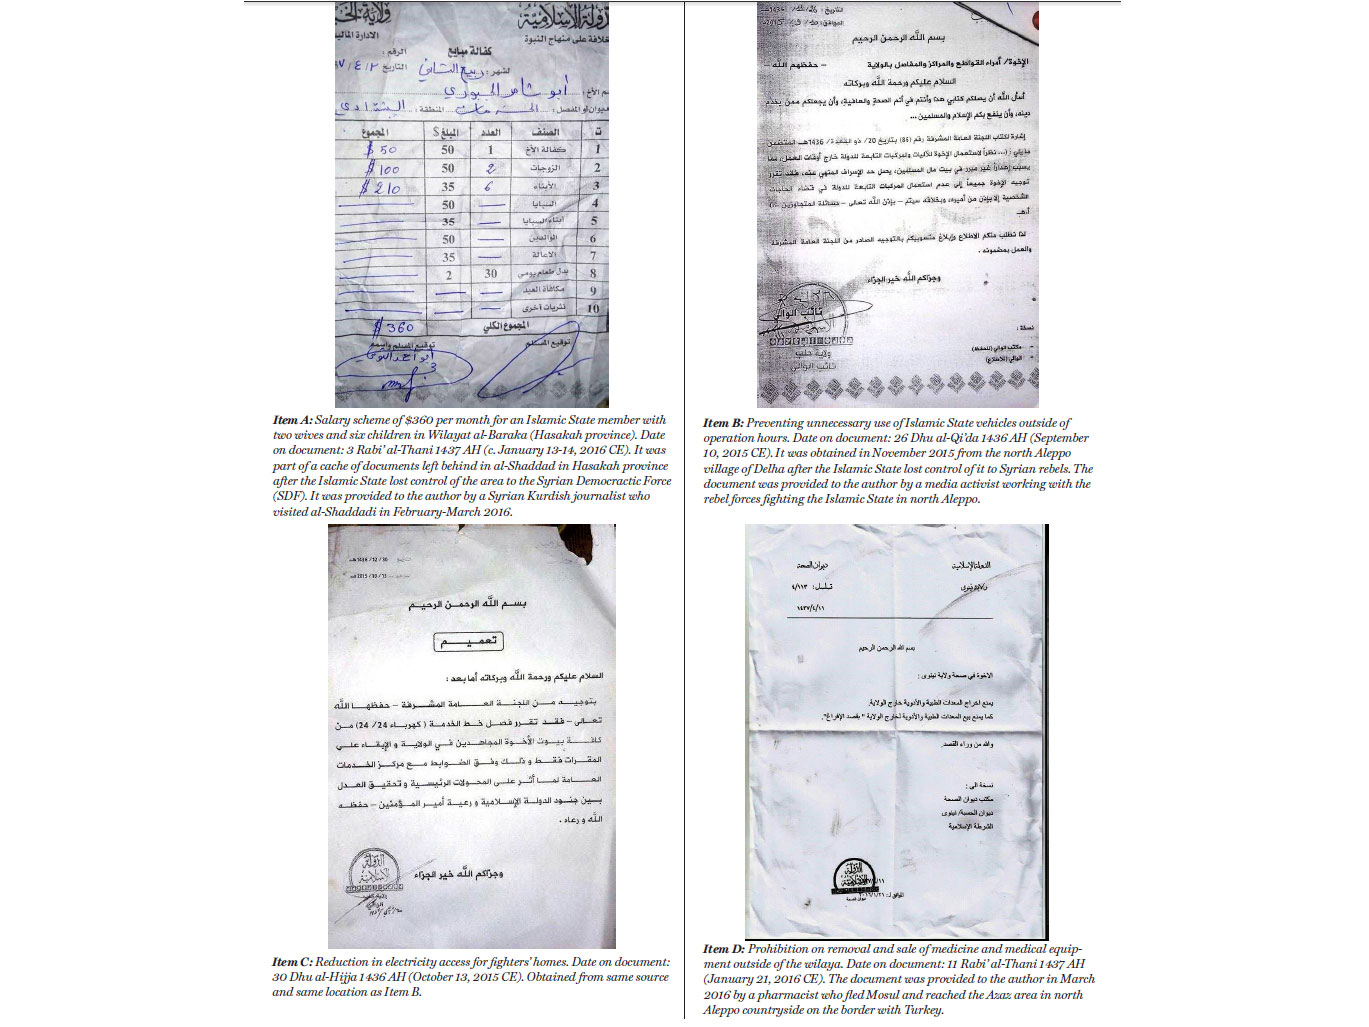 Enlarged view: Islamic State documents